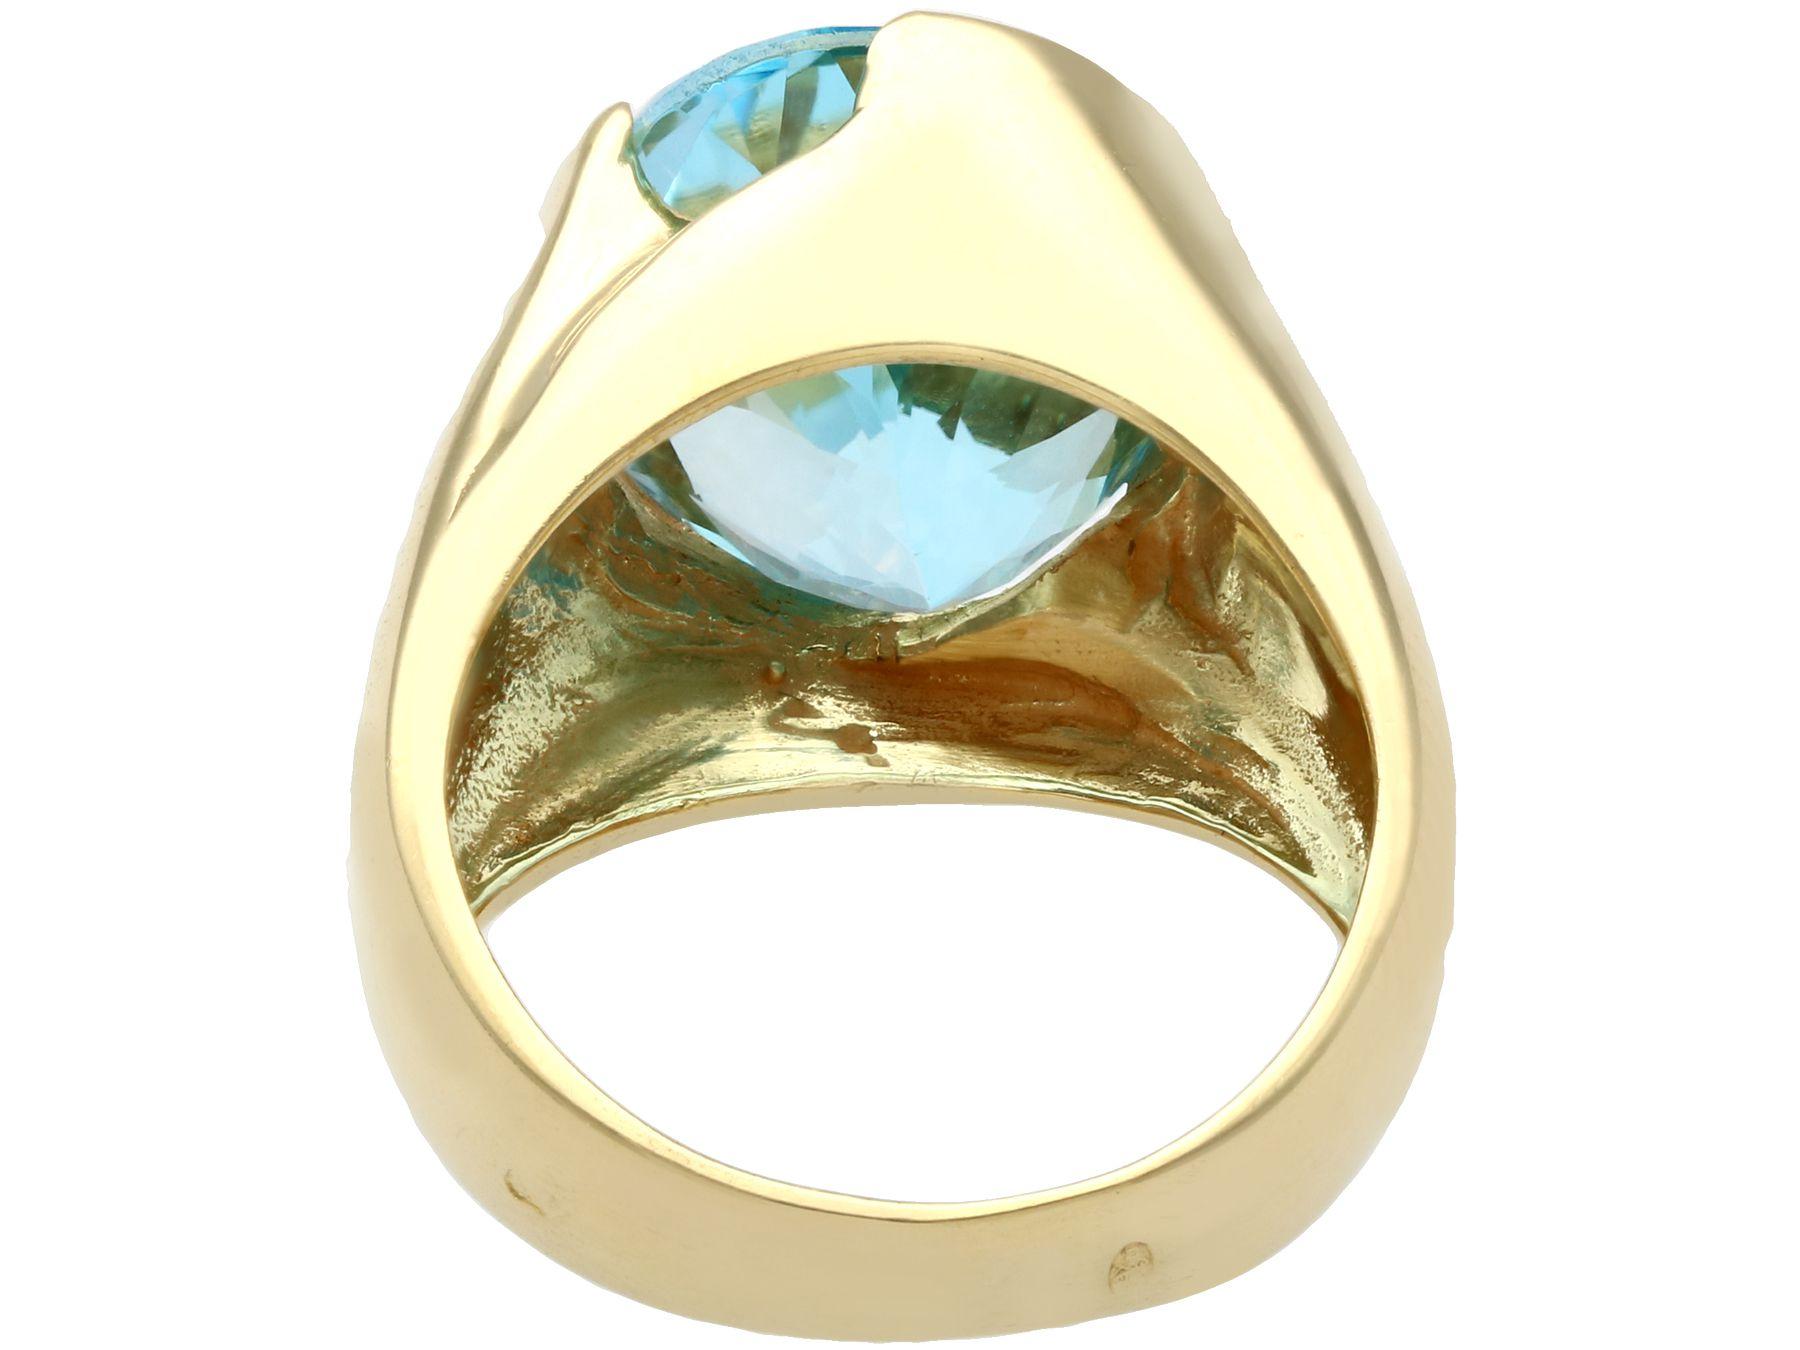 Vintage 1970s 14.12 Carat Oval Cut Topaz Gold Cocktail Ring In Excellent Condition For Sale In Jesmond, Newcastle Upon Tyne